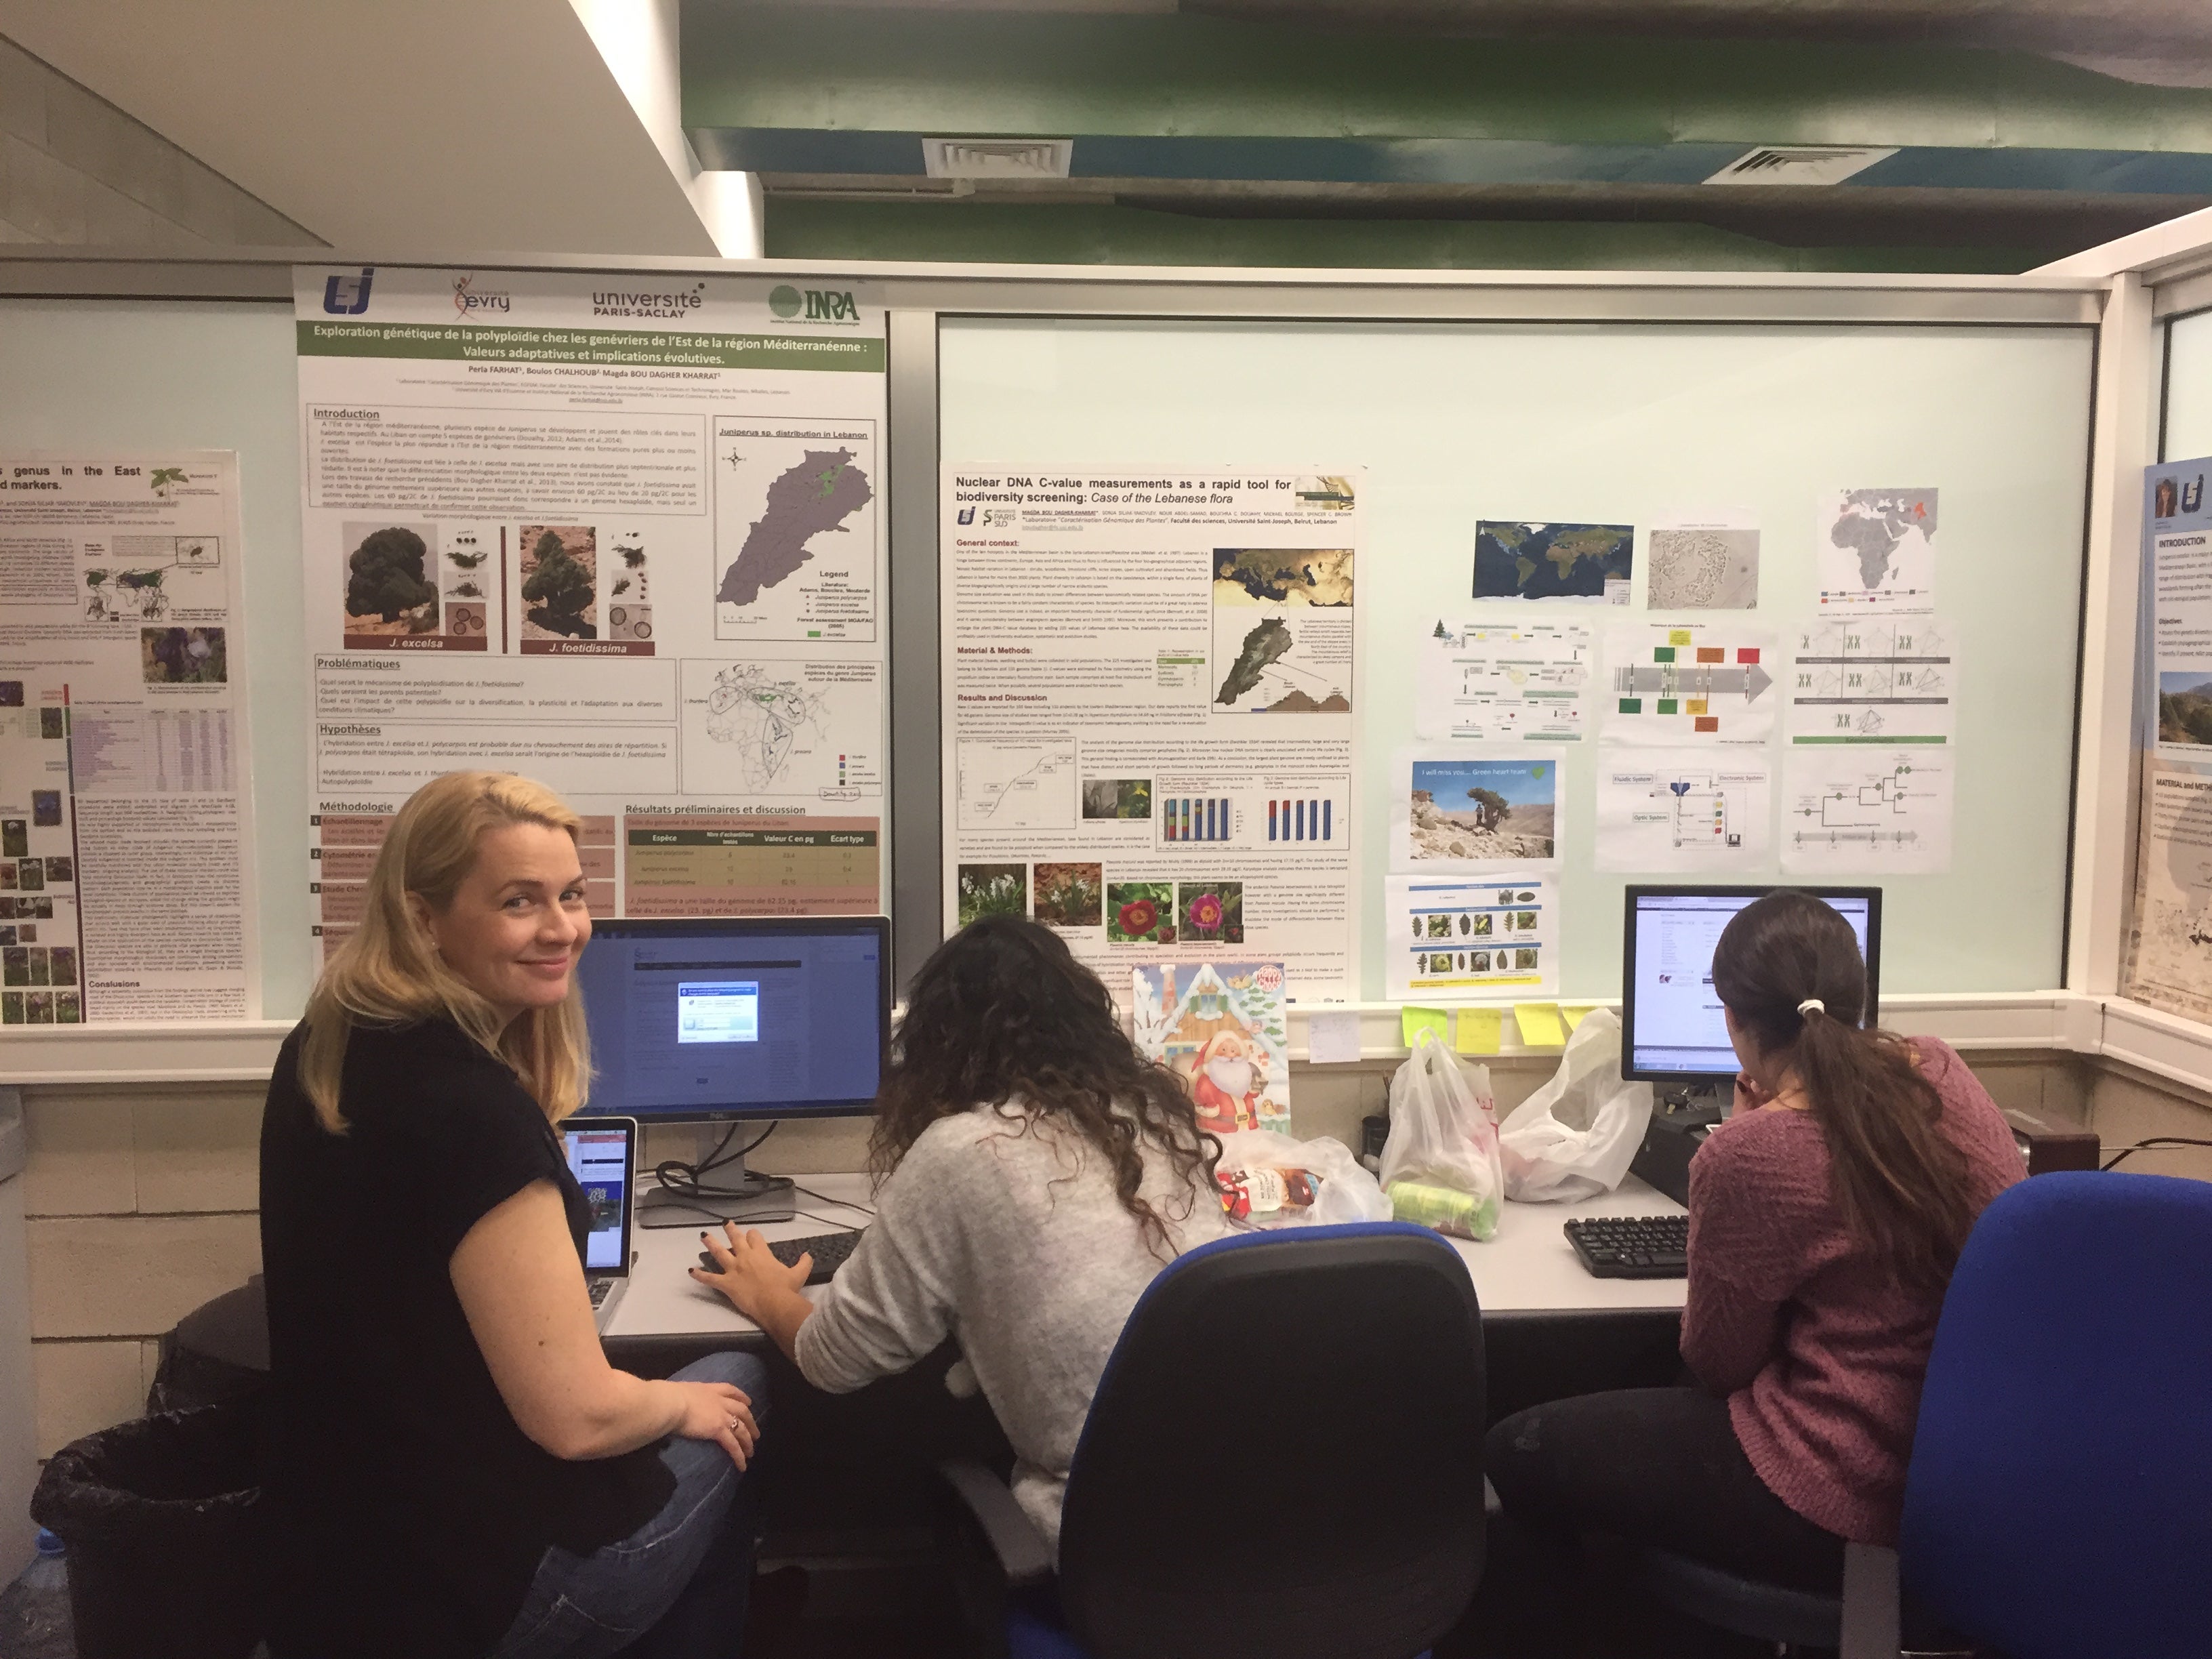 McInerney works with Magda’s graduate students, showing them software that Smithsonian researchers use to analyze next-generation sequencing data. According to McInerney, the students were fast learners.